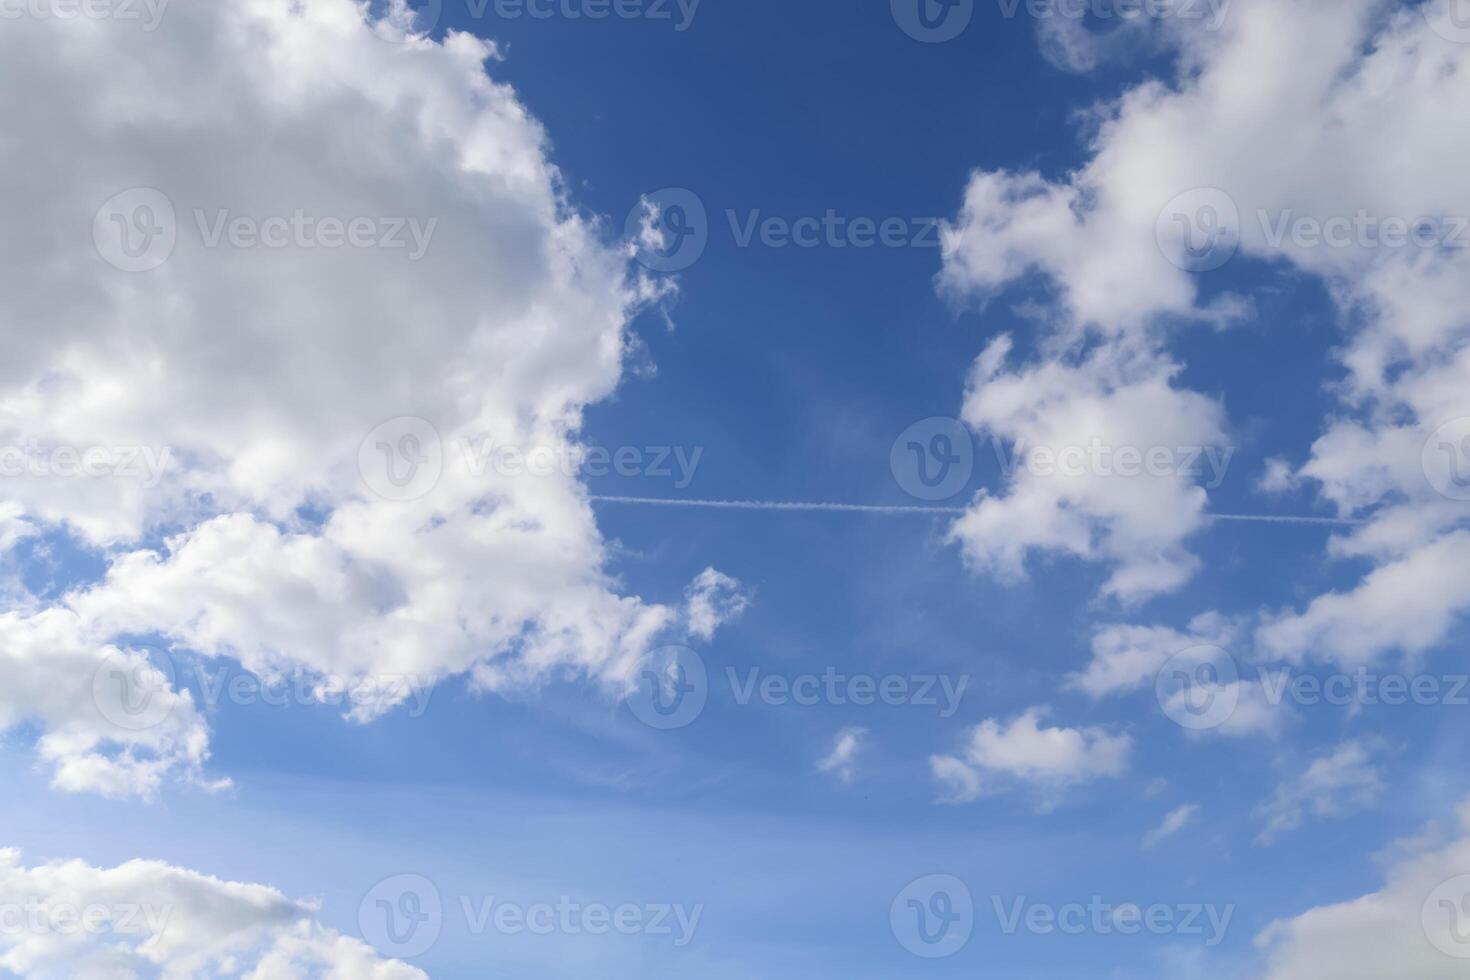 Beautiful fluffy white cloud formations in a deep blue summer sky photo